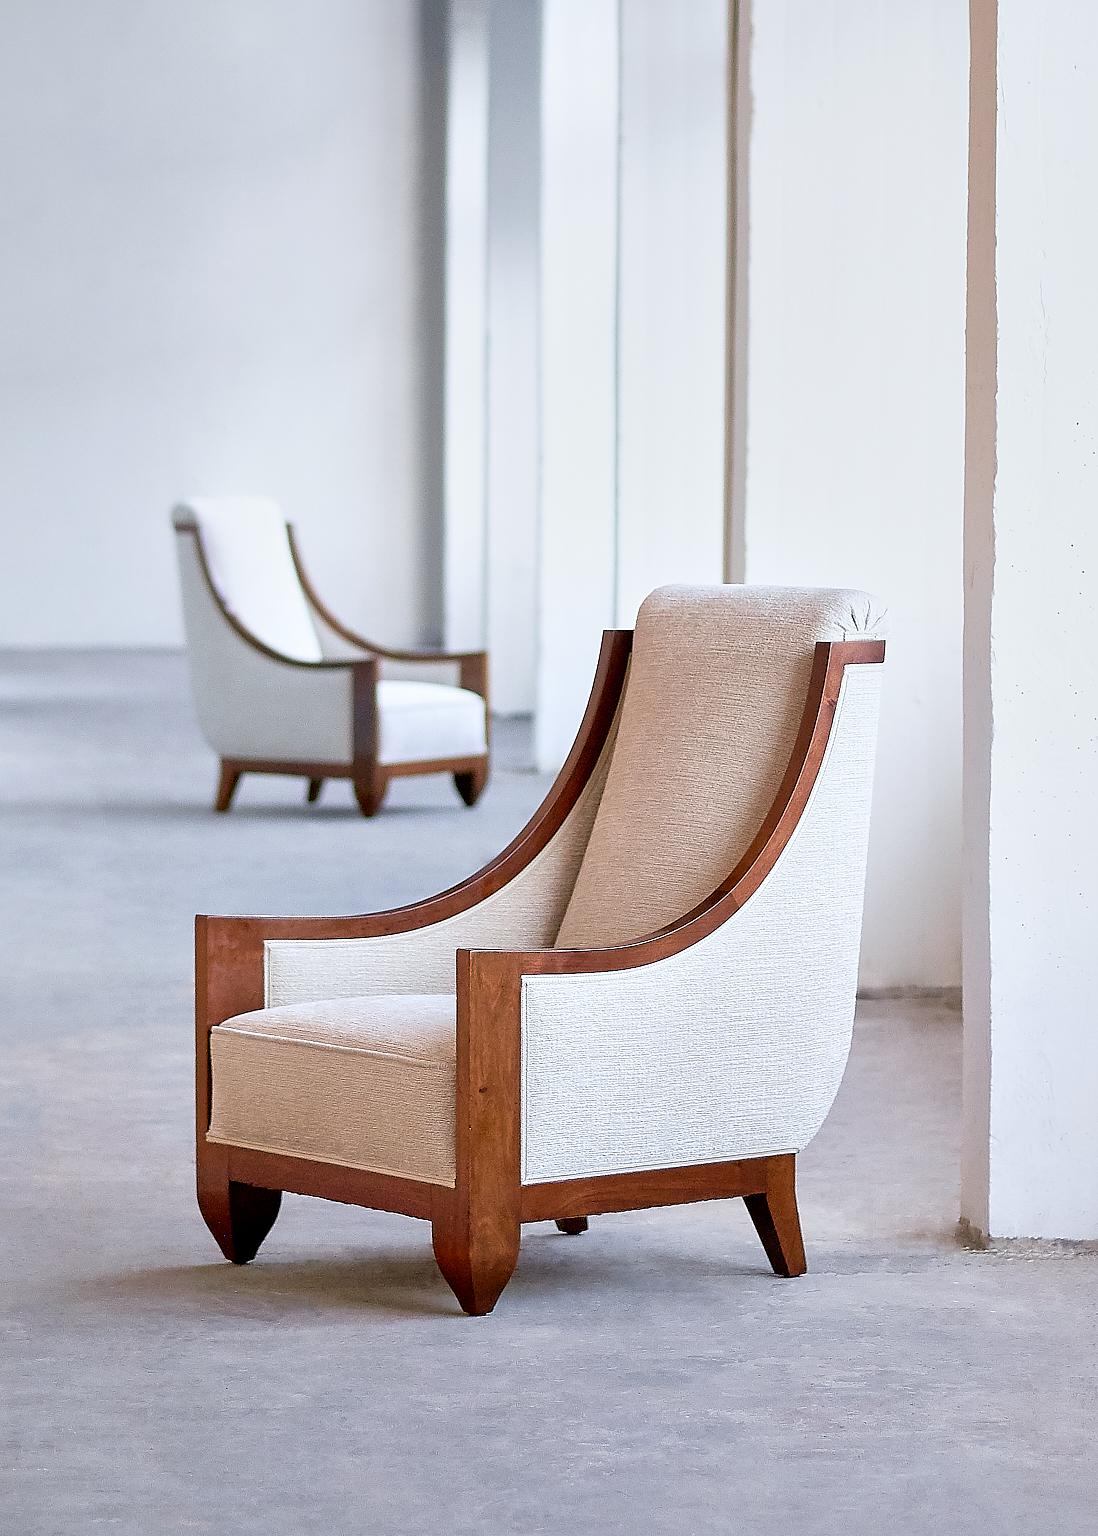 This rare pair of armchairs was designed by André Sornay and produced in his own workshop in Lyon, France in the late 1920s. The solid walnut frame with its curved armrests and striking frontal legs perfectly illustrates the craftsmanship and